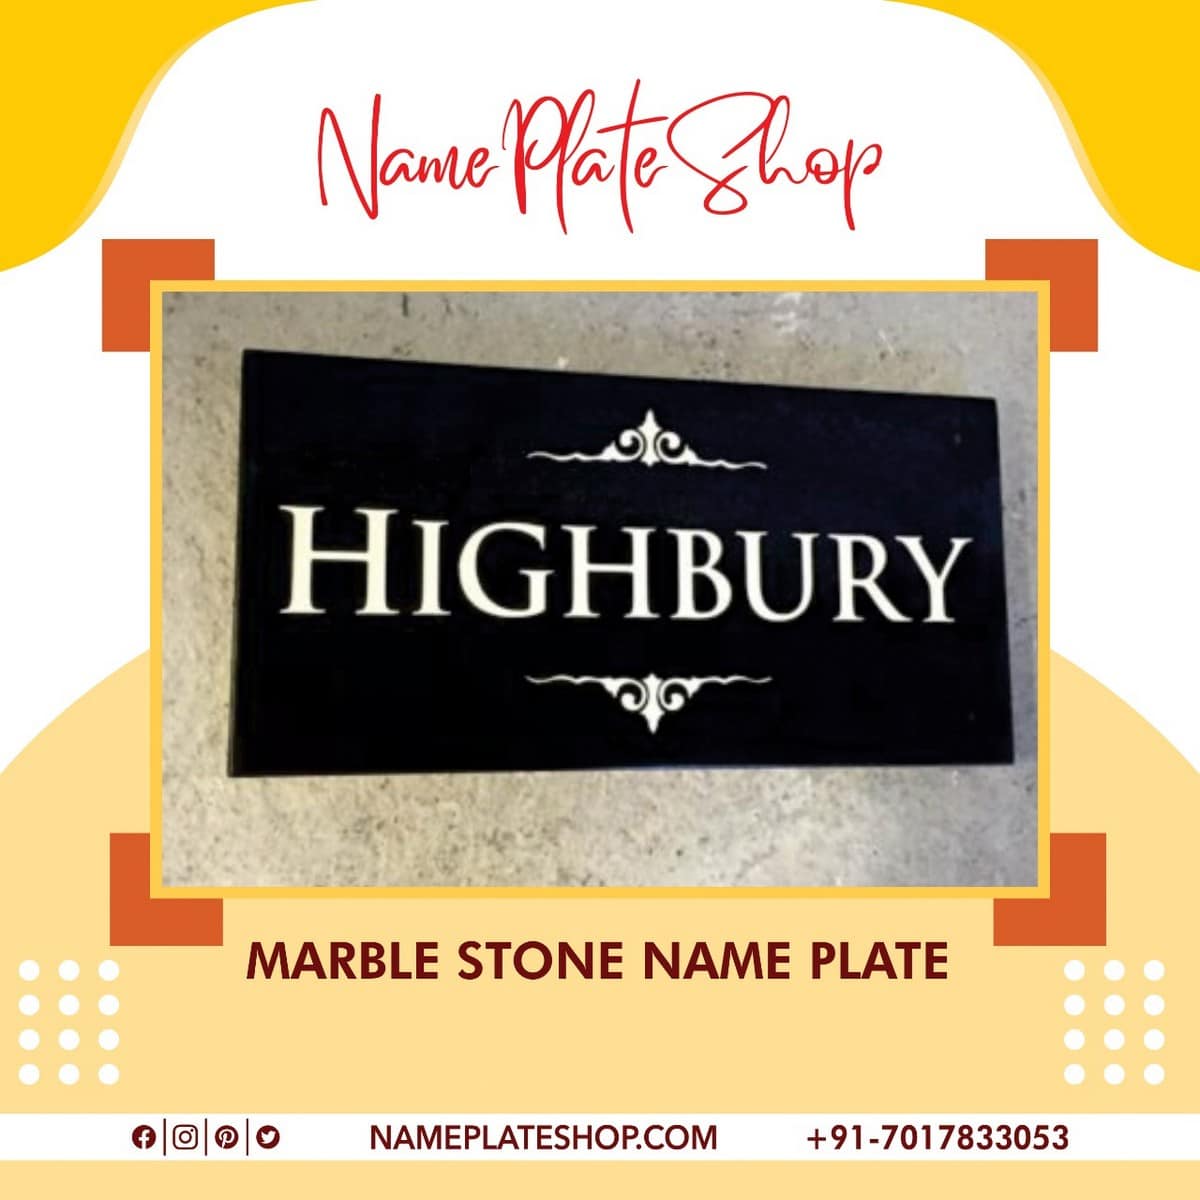 Marble Stone Name Plate Available On Nameplateshop